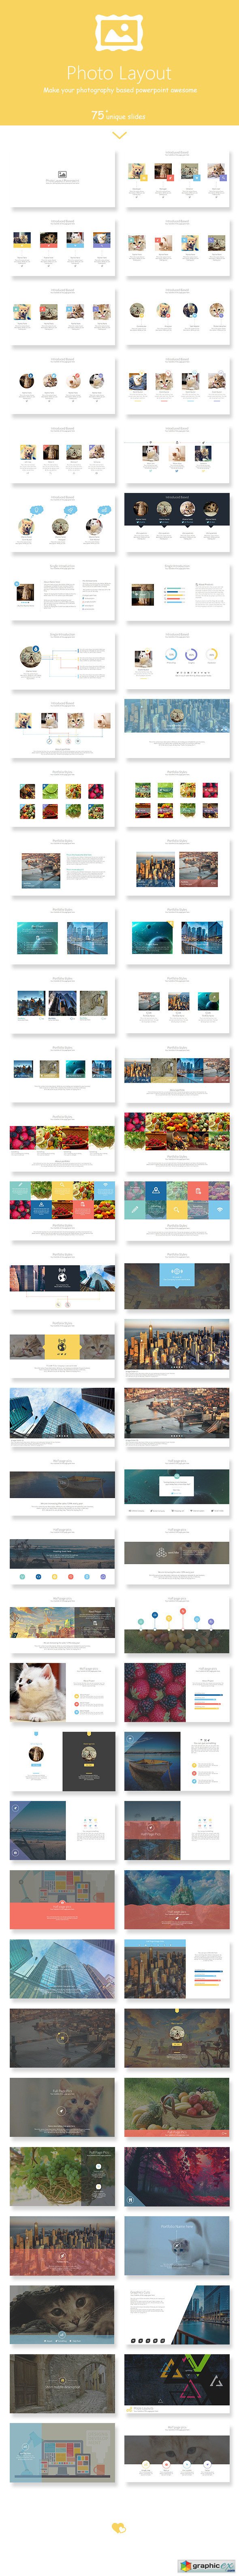 Photo Layout Powerpoint Presentation Template